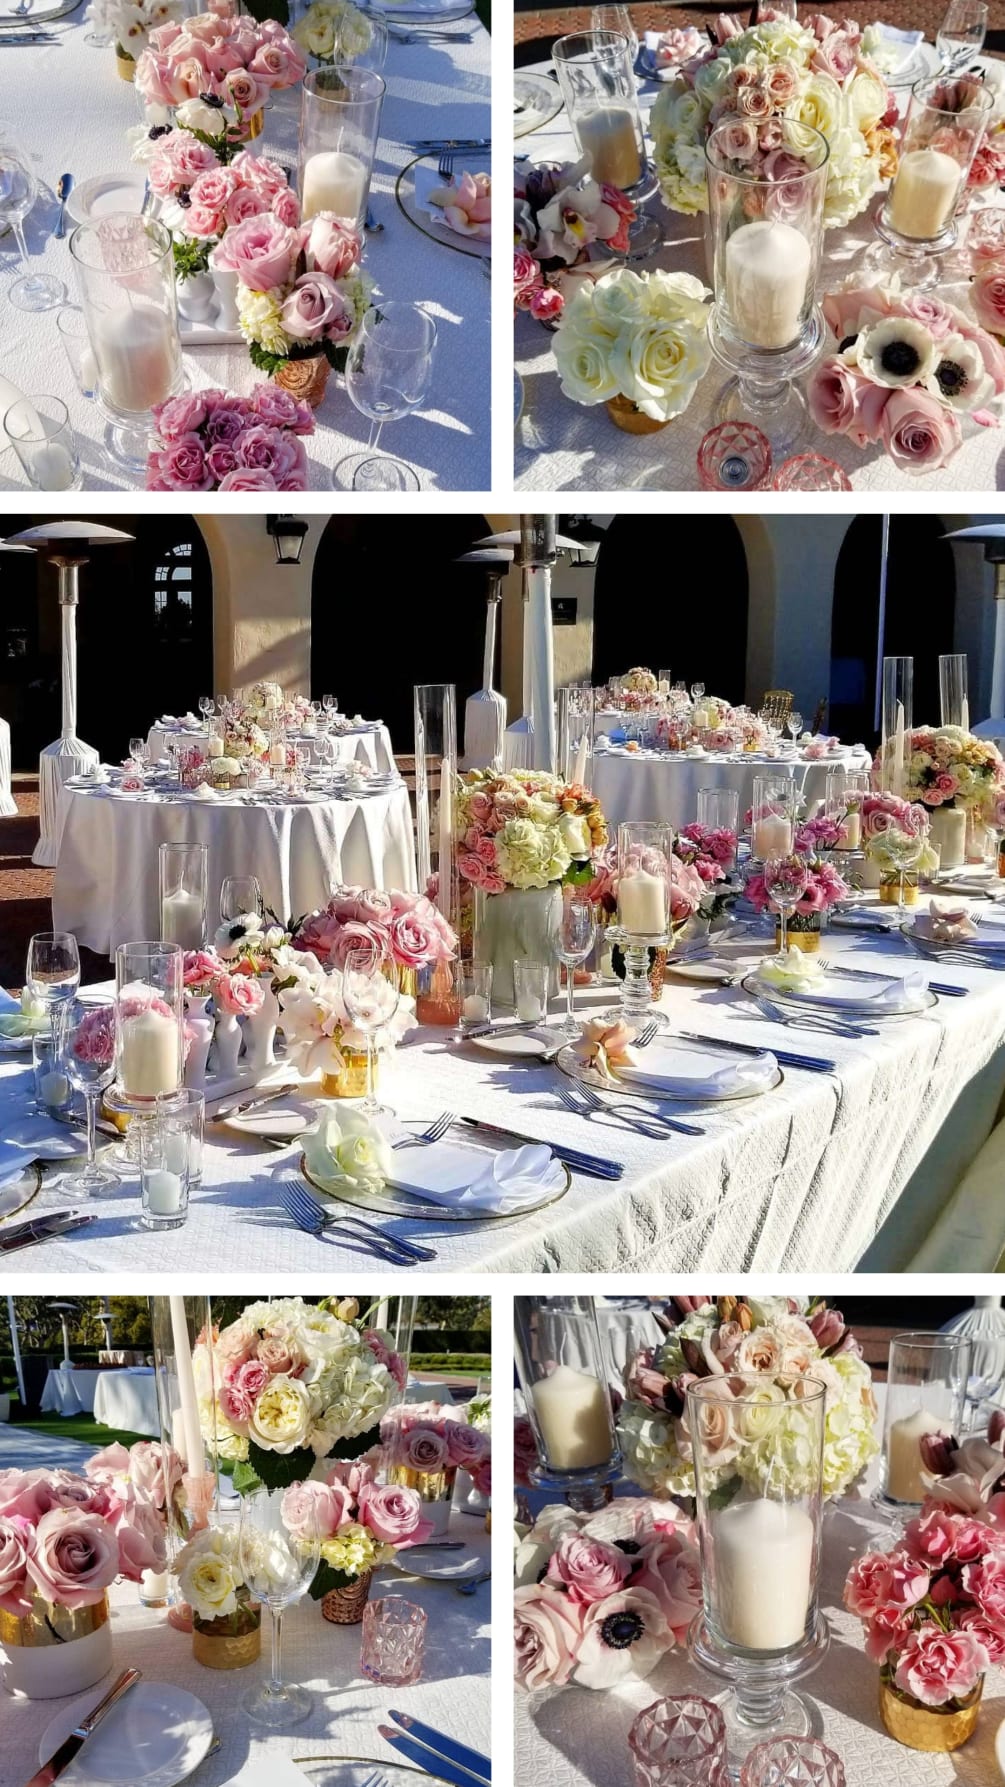 A sunny wedding with lush pink and white flowers creates a joyful